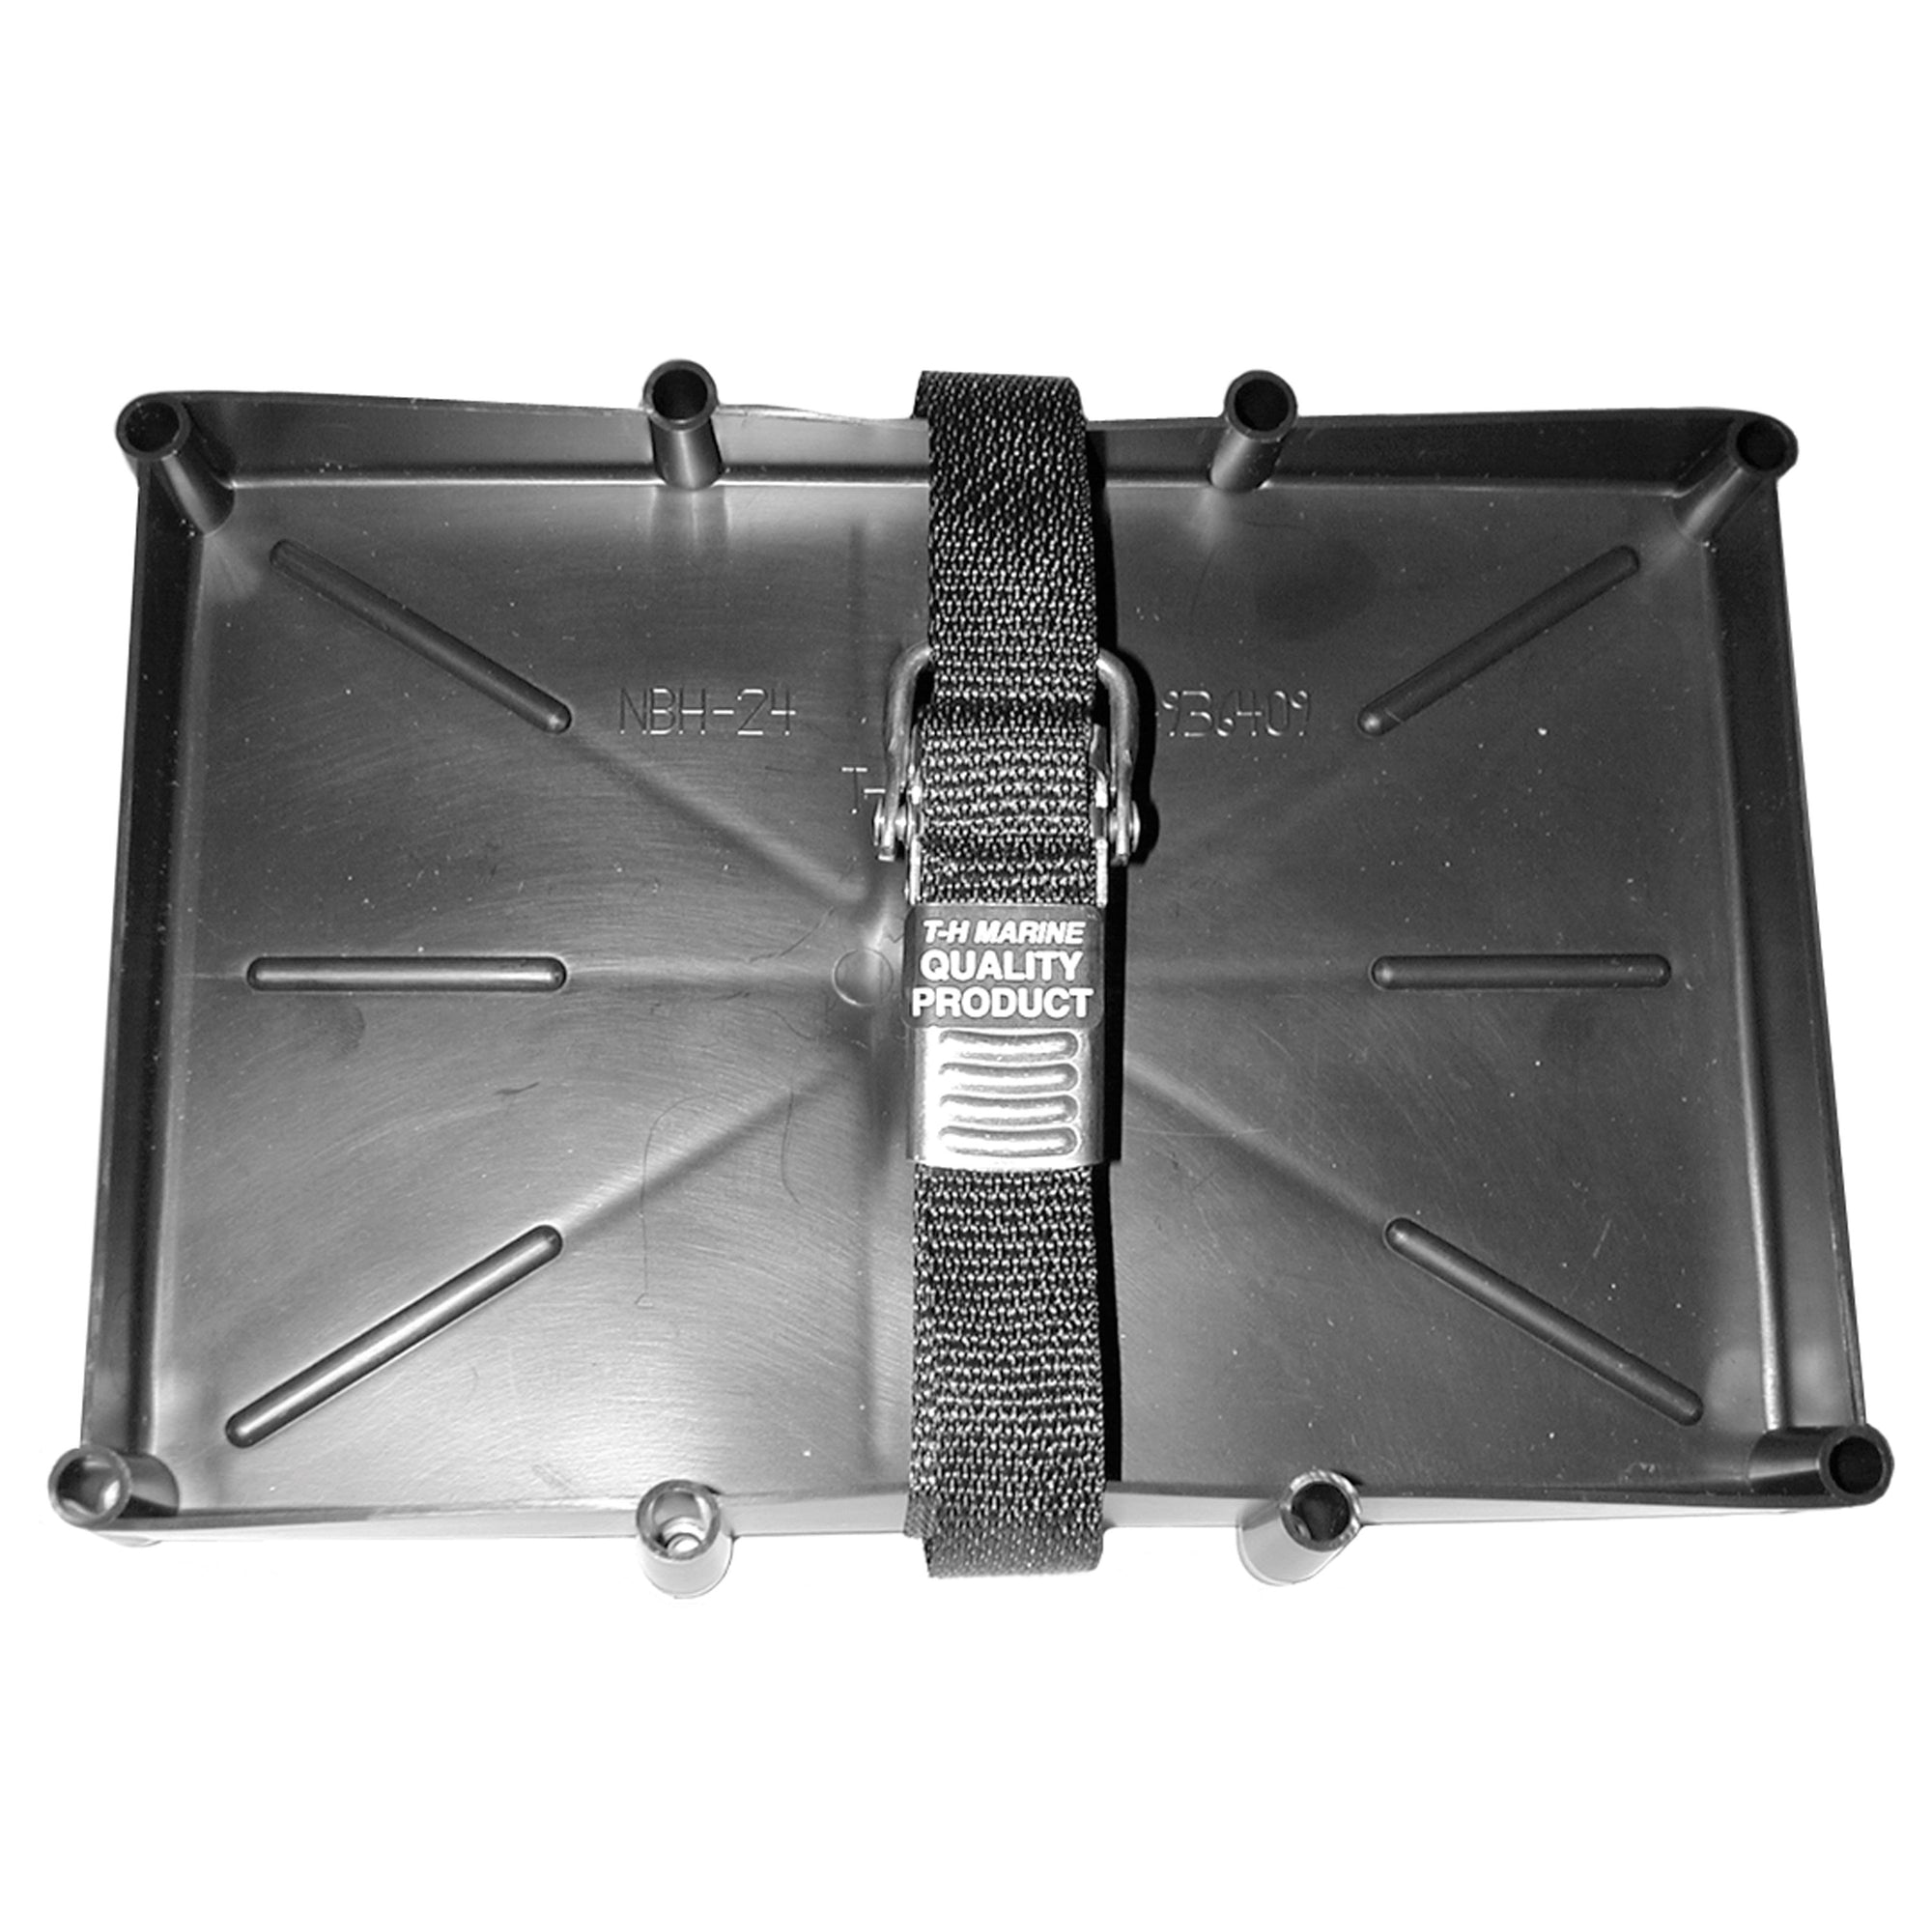 T-H Marine NBH-27-SSC-DP Battery Holder Tray With Stainless Steel Buckle - 27 Series